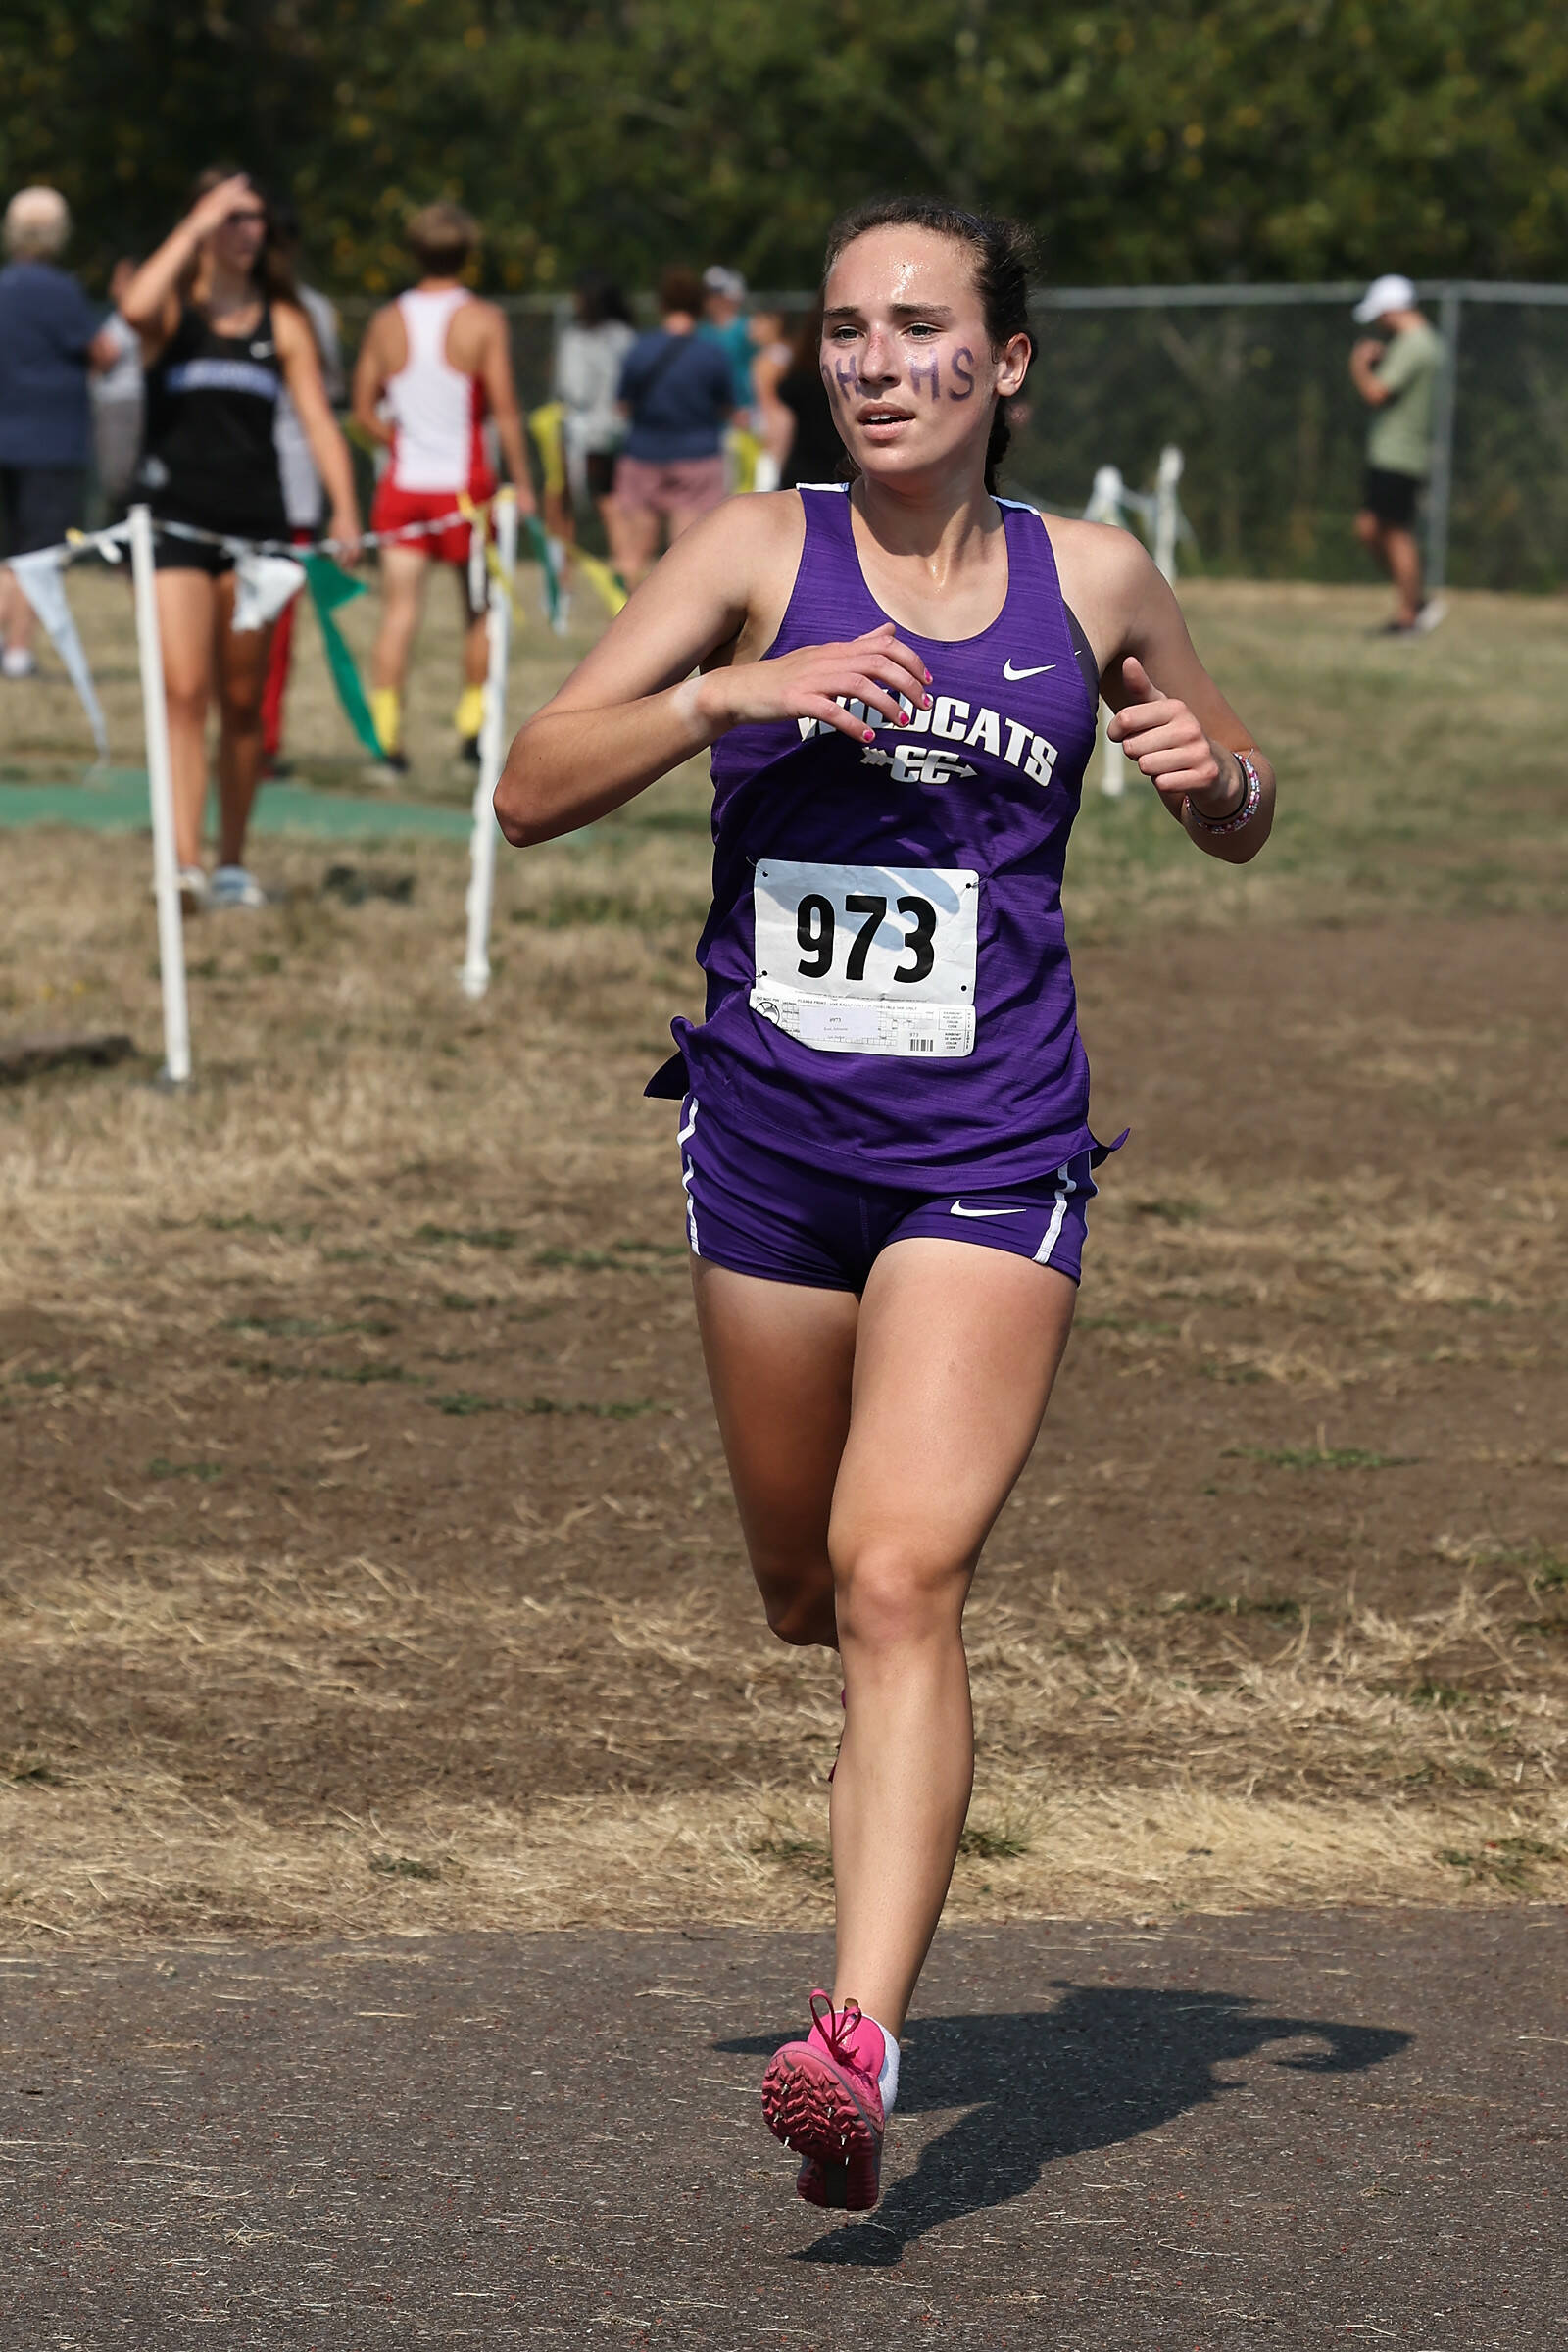 Photo by John Fisken
Oak Harbor High School runner Adrienne Root finished third overall in the 2 Miles Senior cross country race on Sept. 10 at the Sehome Invite at Bellingham’s Civic Stadium. All three Whidbey Island schools participated. Her time was 12.09.99.